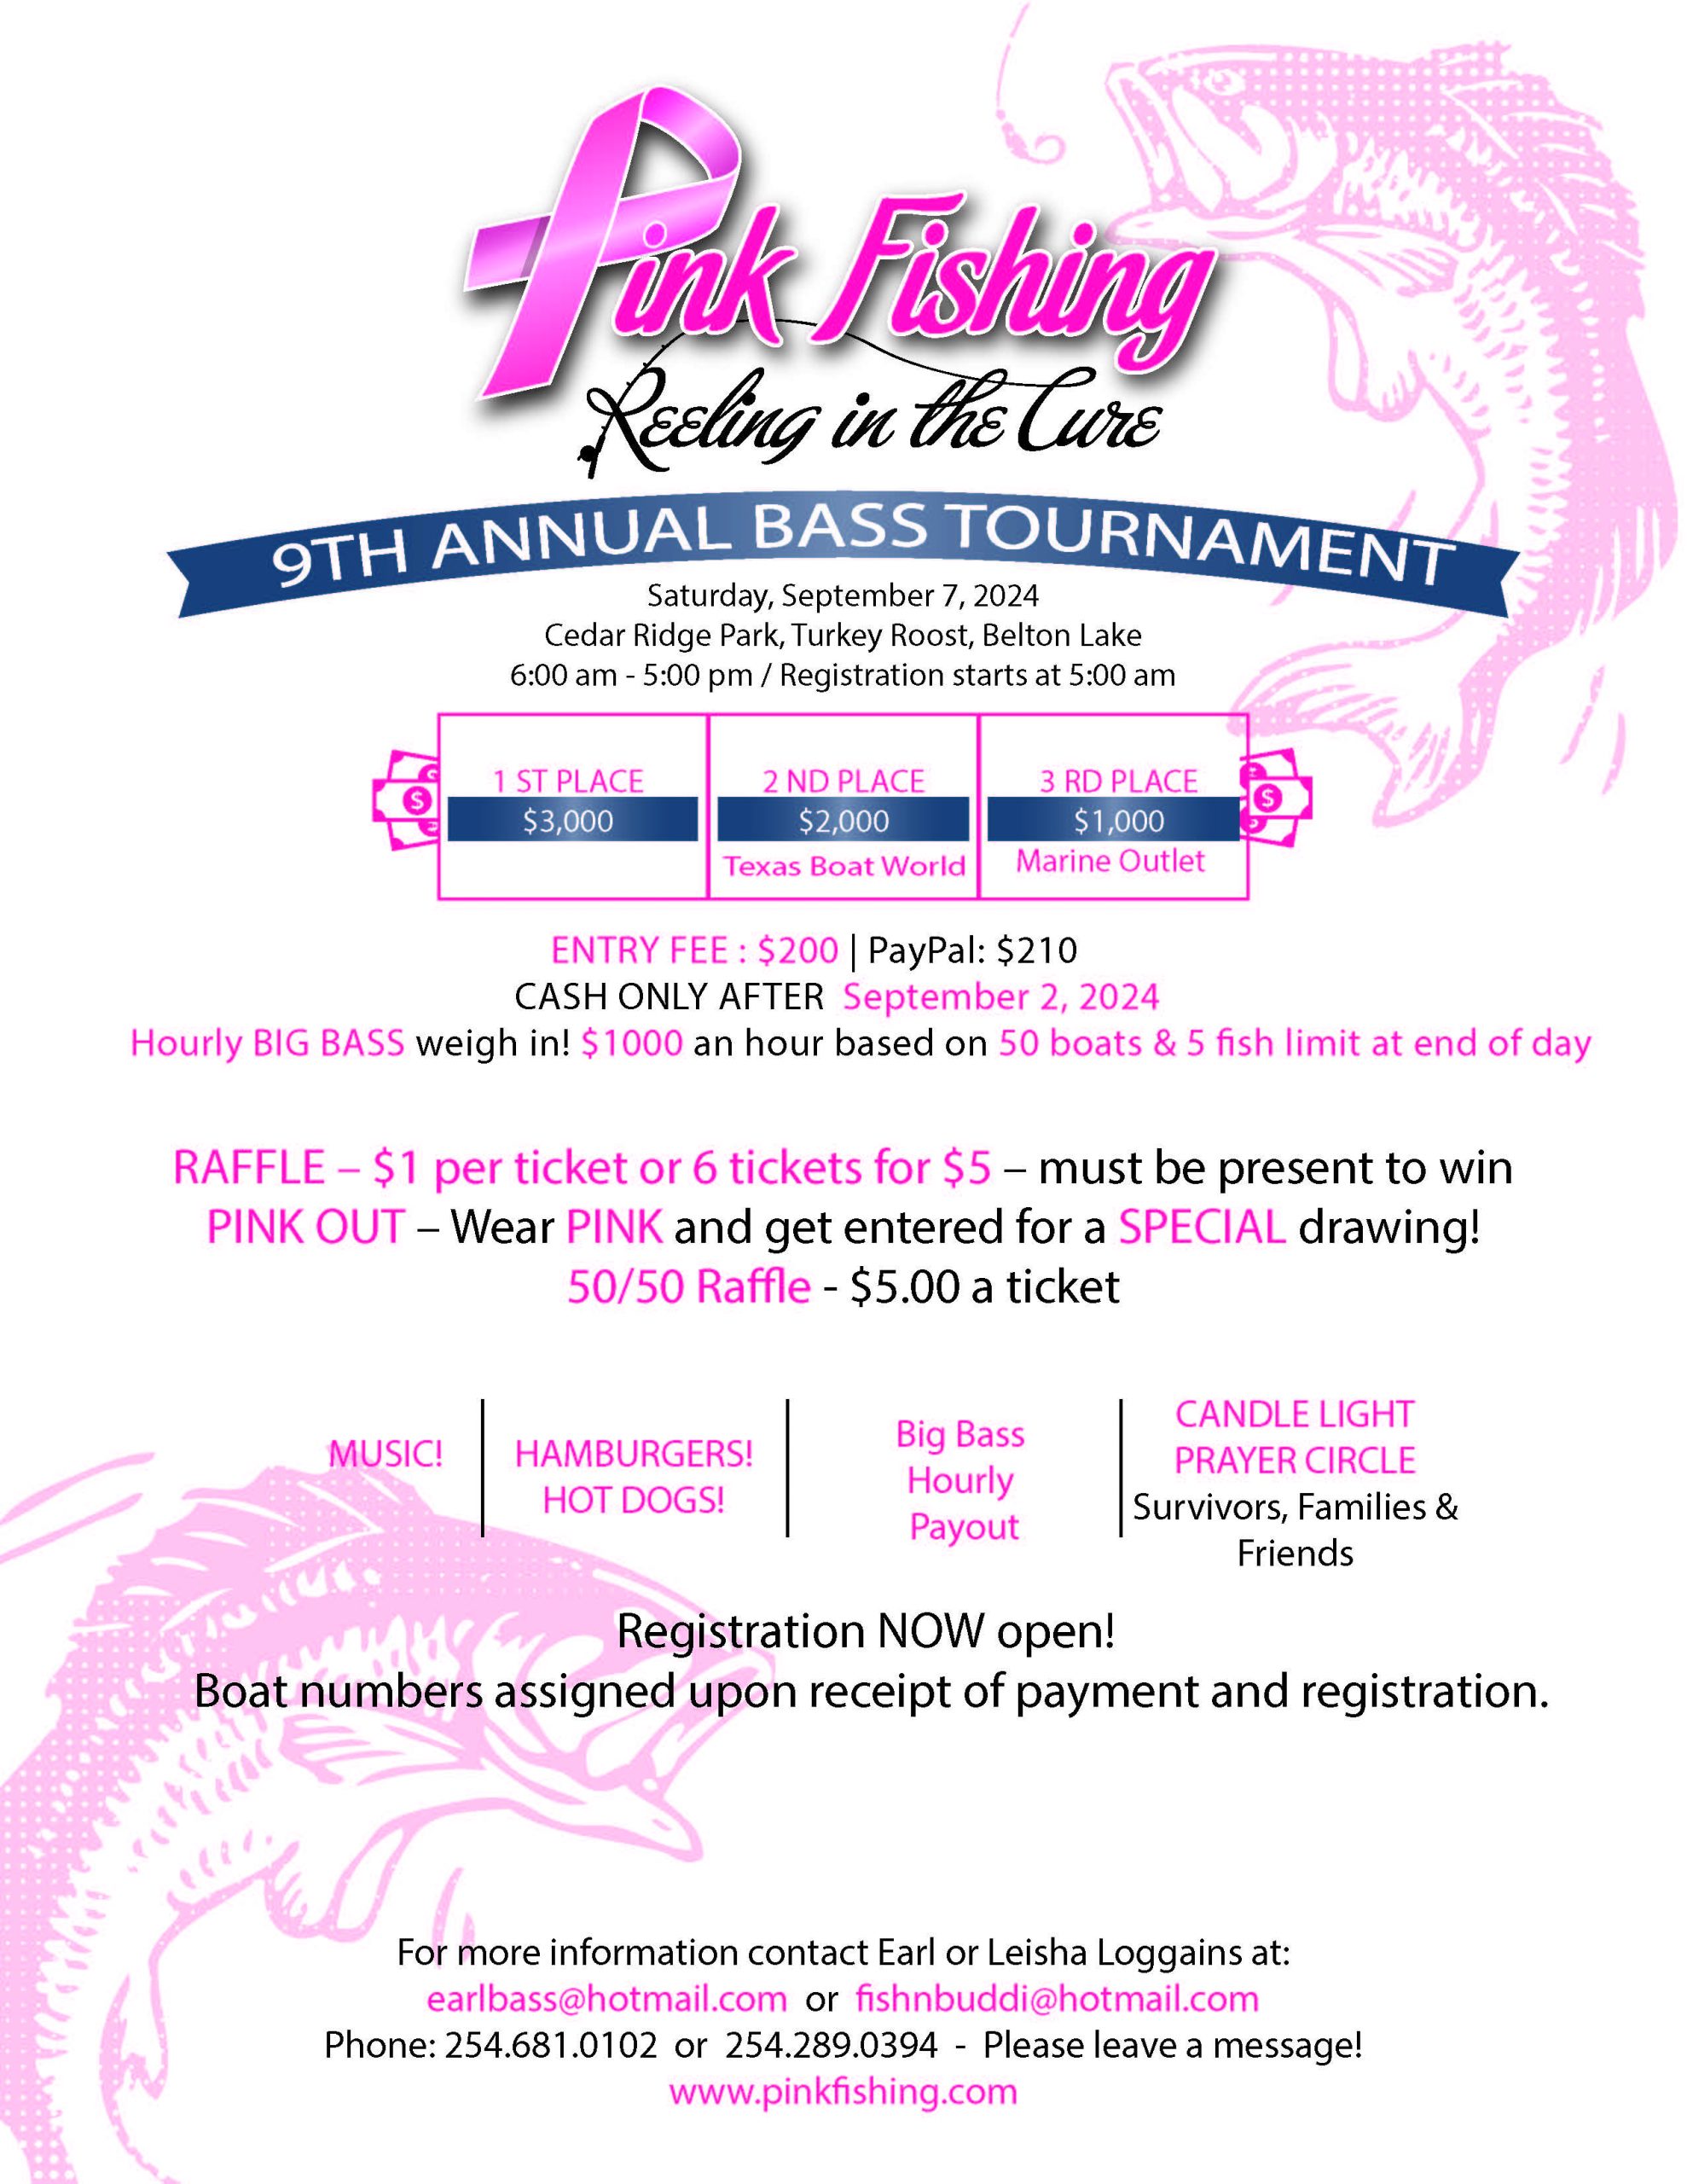 https://pinkfishing.com/wp-content/uploads/sites/14/9th-annual-Team-Bass-Tournament-Flyer-scaled.jpg